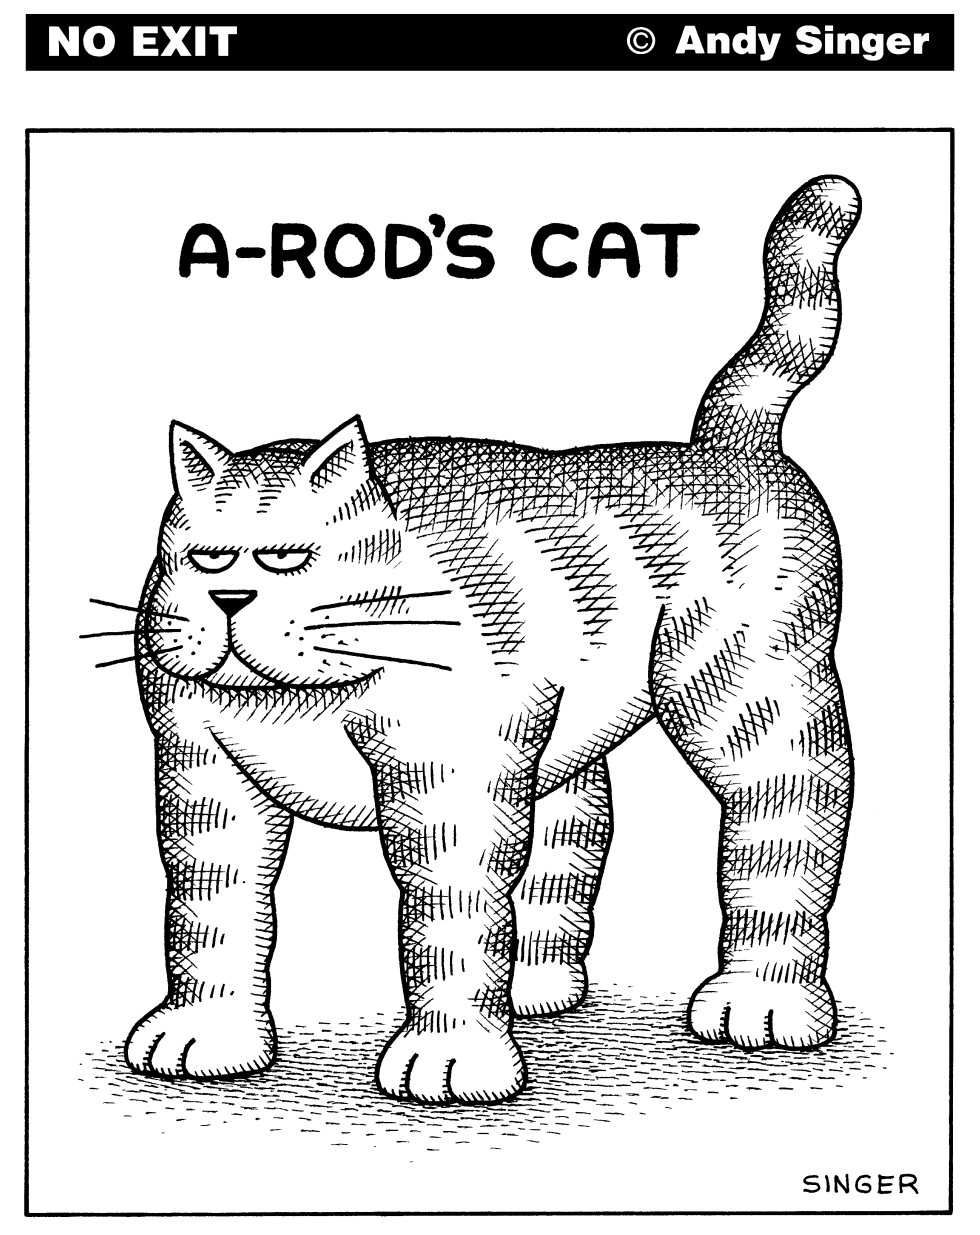 A-RODS CAT by Andy Singer